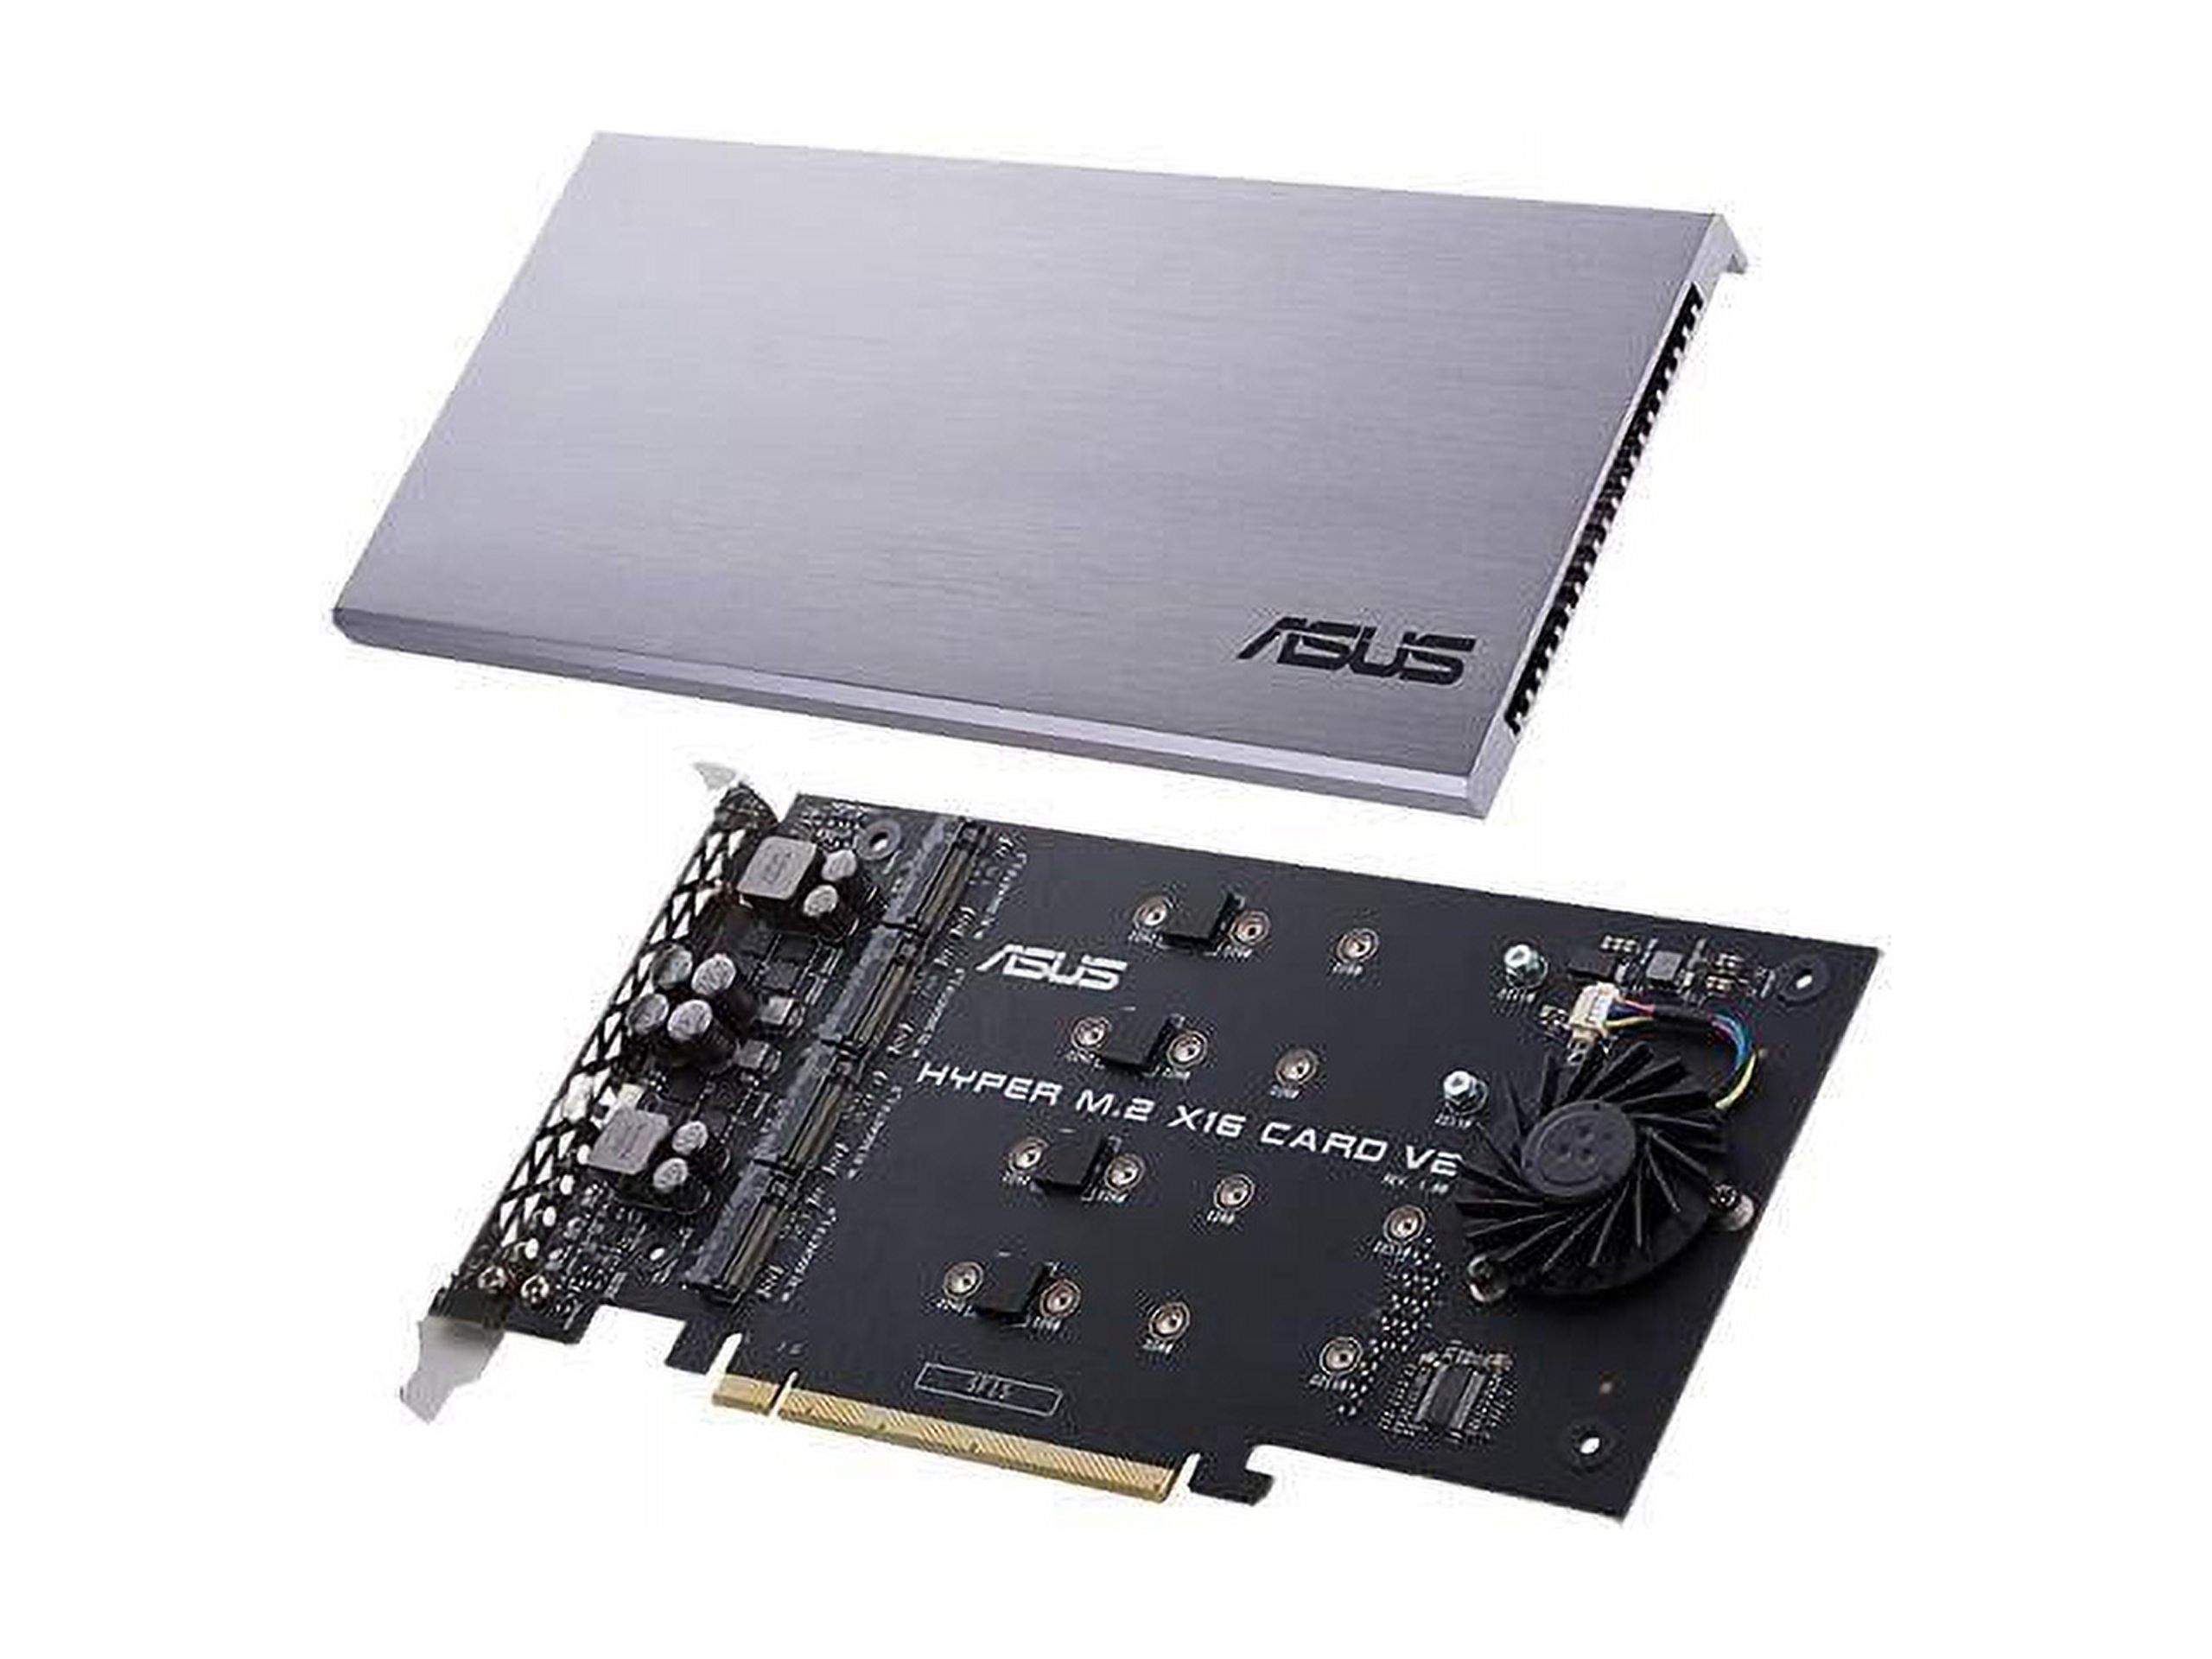 ASUS Hyper M.2 x16 PCIe 3.0 x4 Expansion Card V2 Supports 4 x NVMe M.2 (2242/2260/2280/22110) Up to 128 Gbps for Intel VROC and AMD Ryzen Threadripper NVMe RAID - image 2 of 5